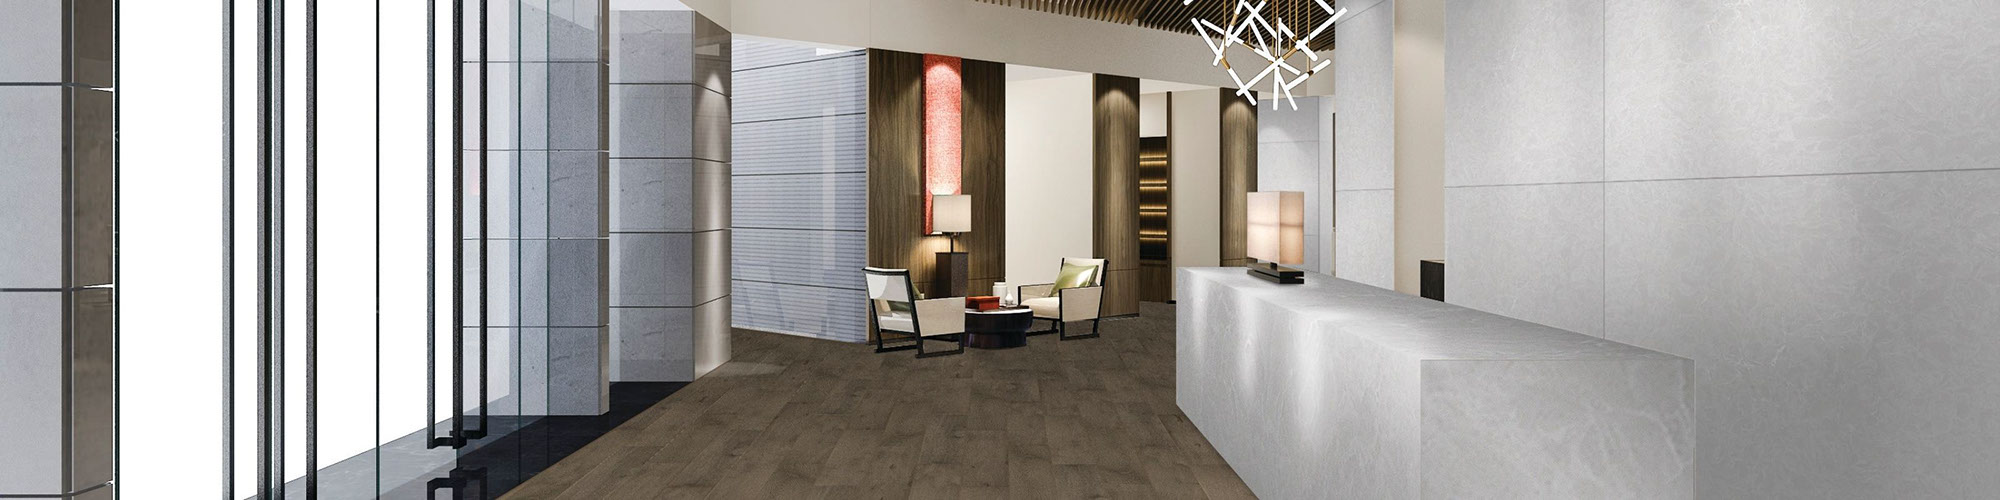 Hotel lobby with front desk countertop & walls of white quartz that looks like stone, wood look tile flooring, and pendant lighting.